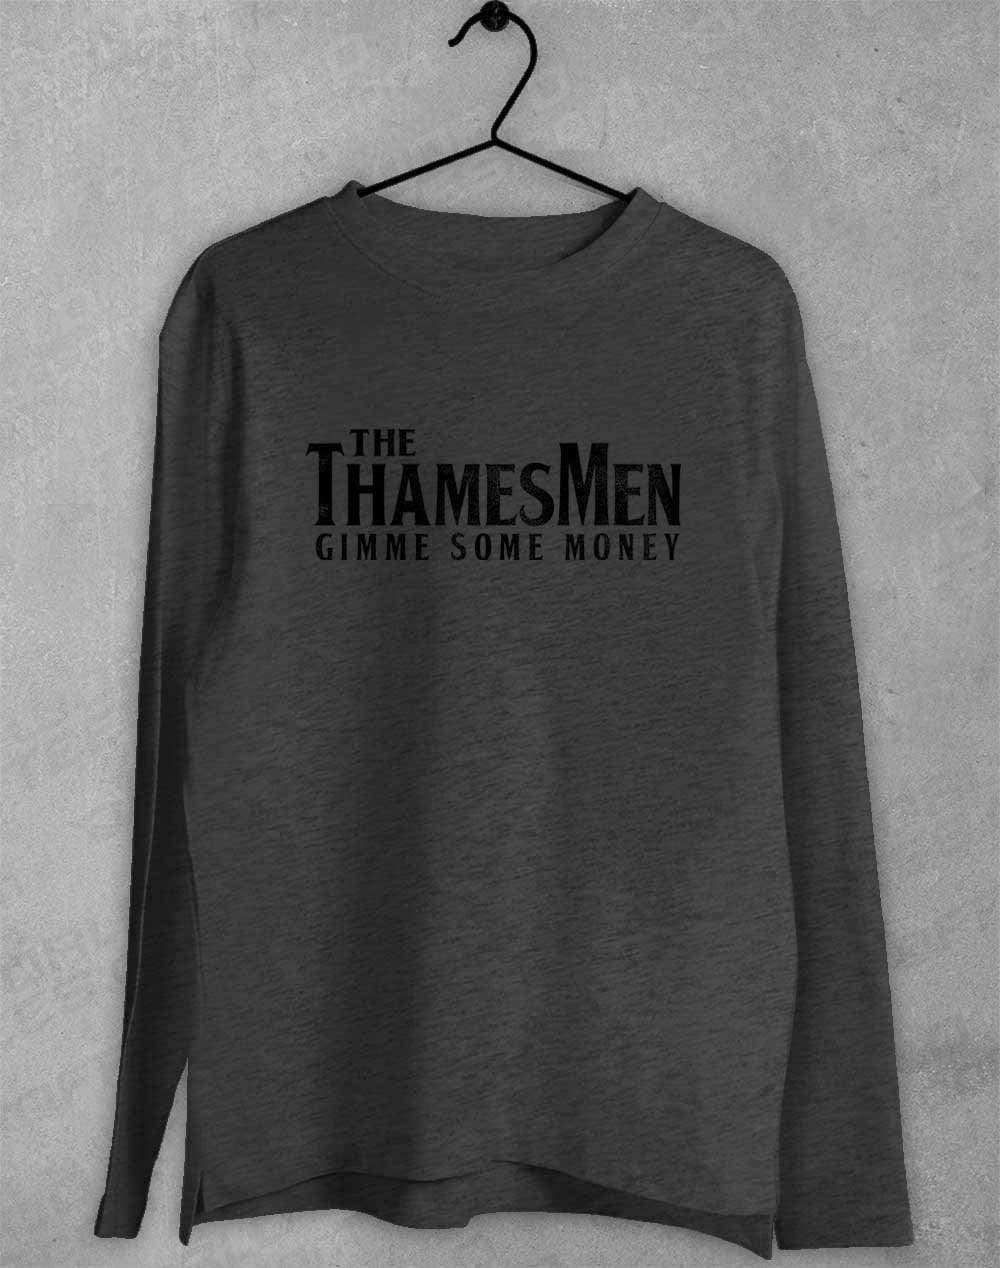 The Thamesmen Gimme Some Money Long Sleeve T-Shirt S / Dark Heather  - Off World Tees